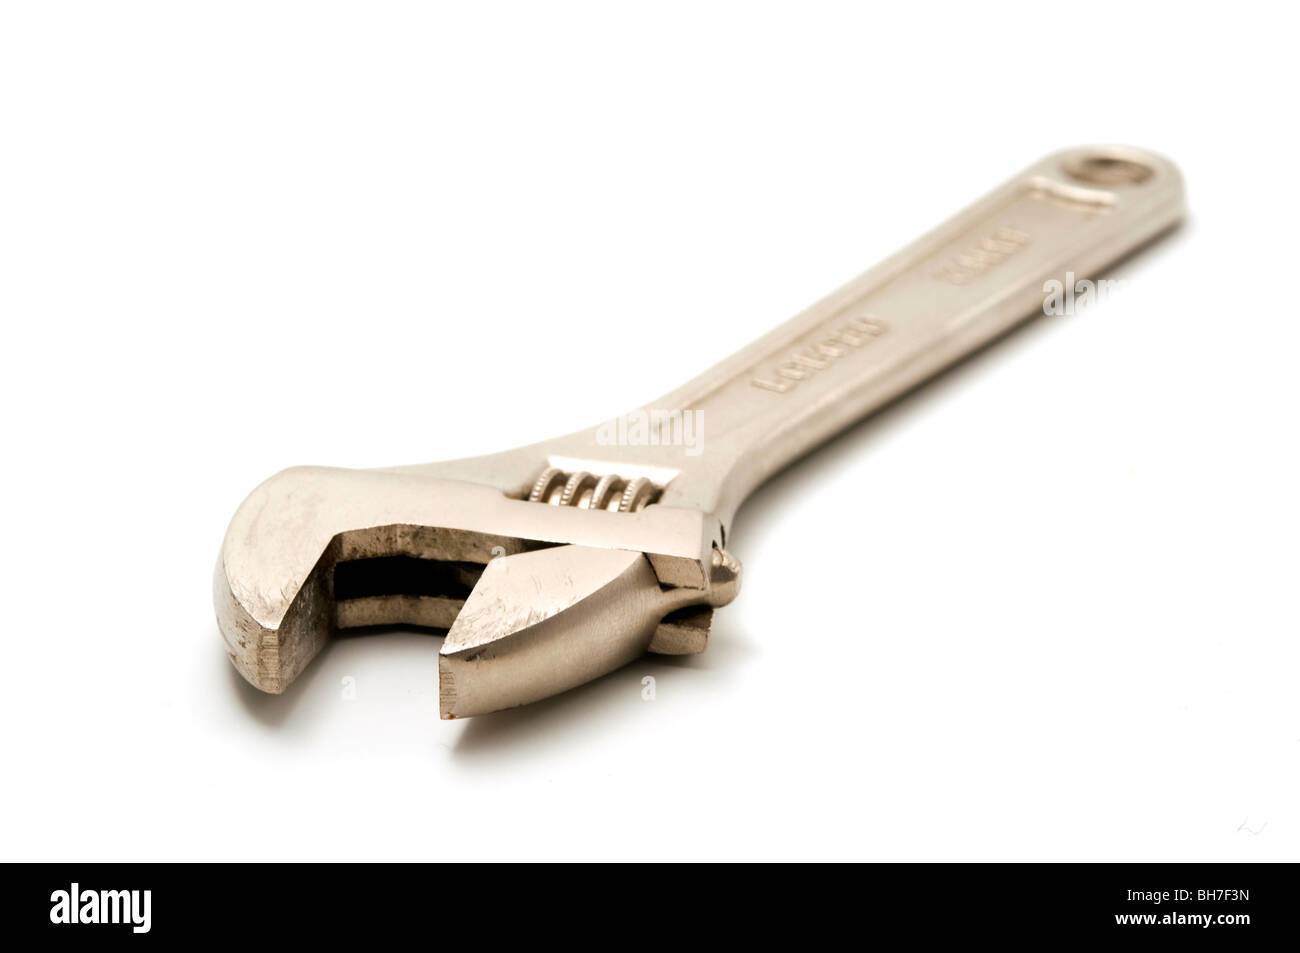 Adjustable wrench on a white background Stock Photo